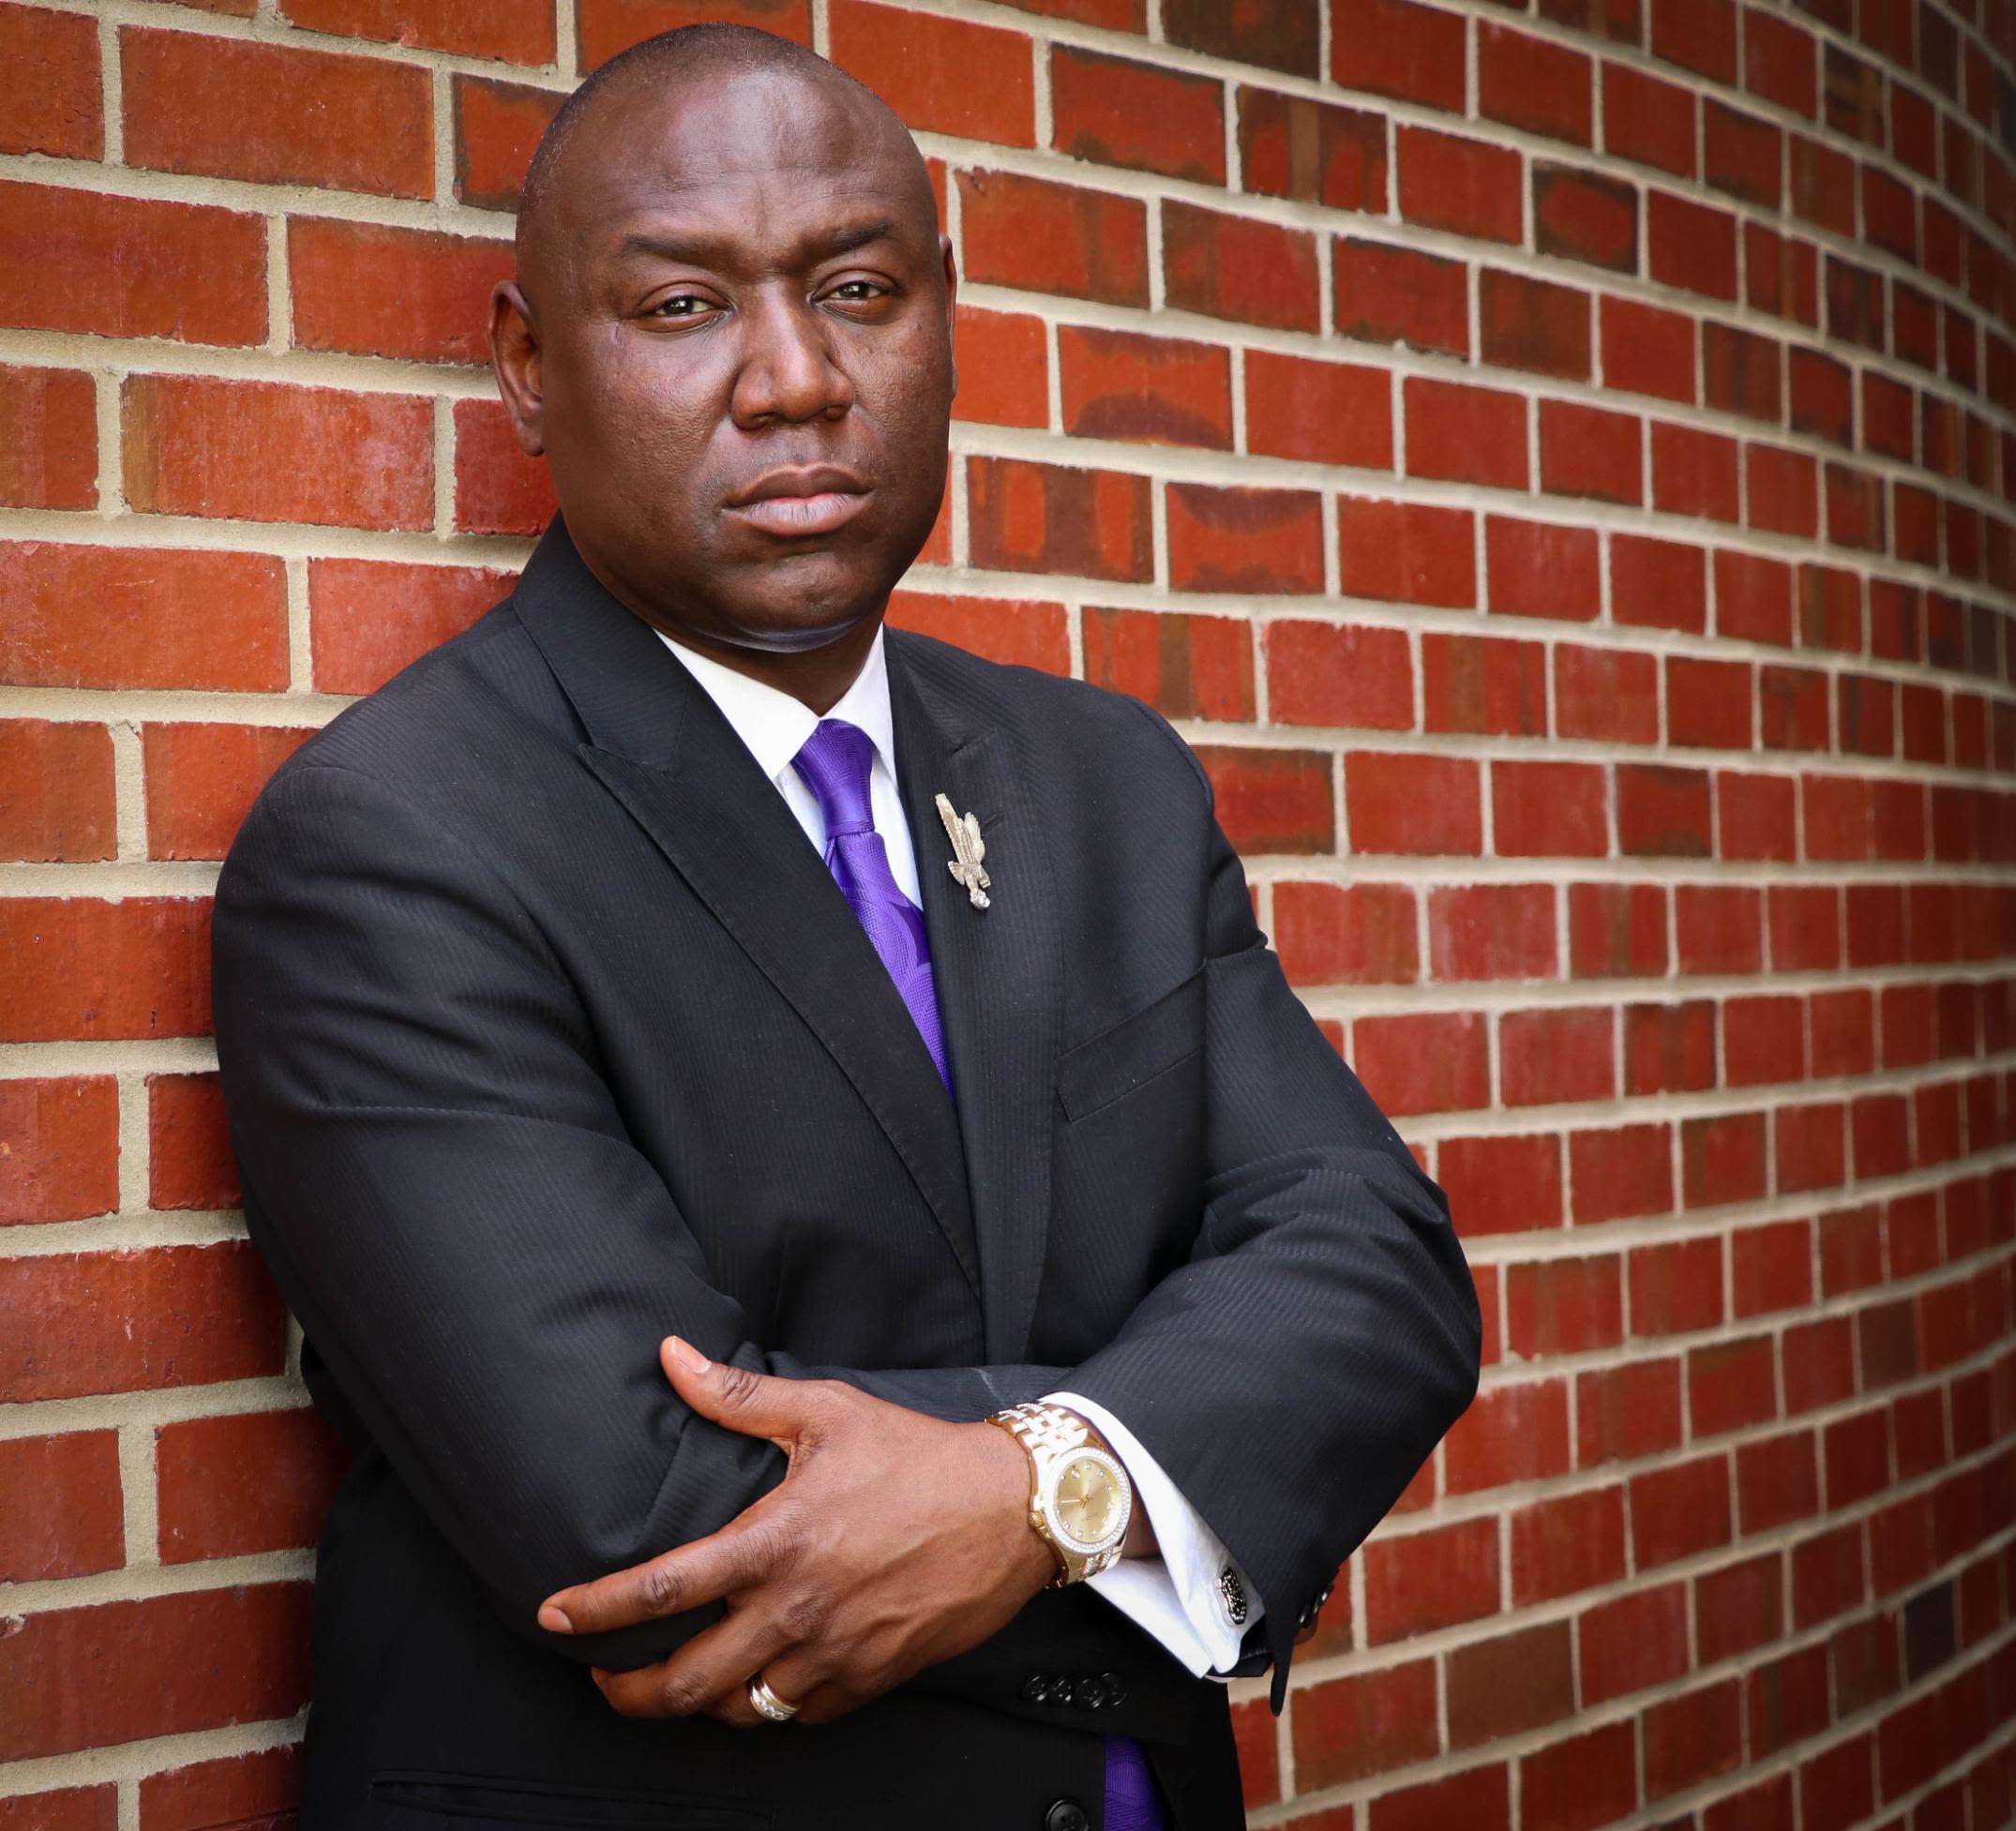 Benjamin Crump, arms crossed in front of him, standing with his back against a brick wall